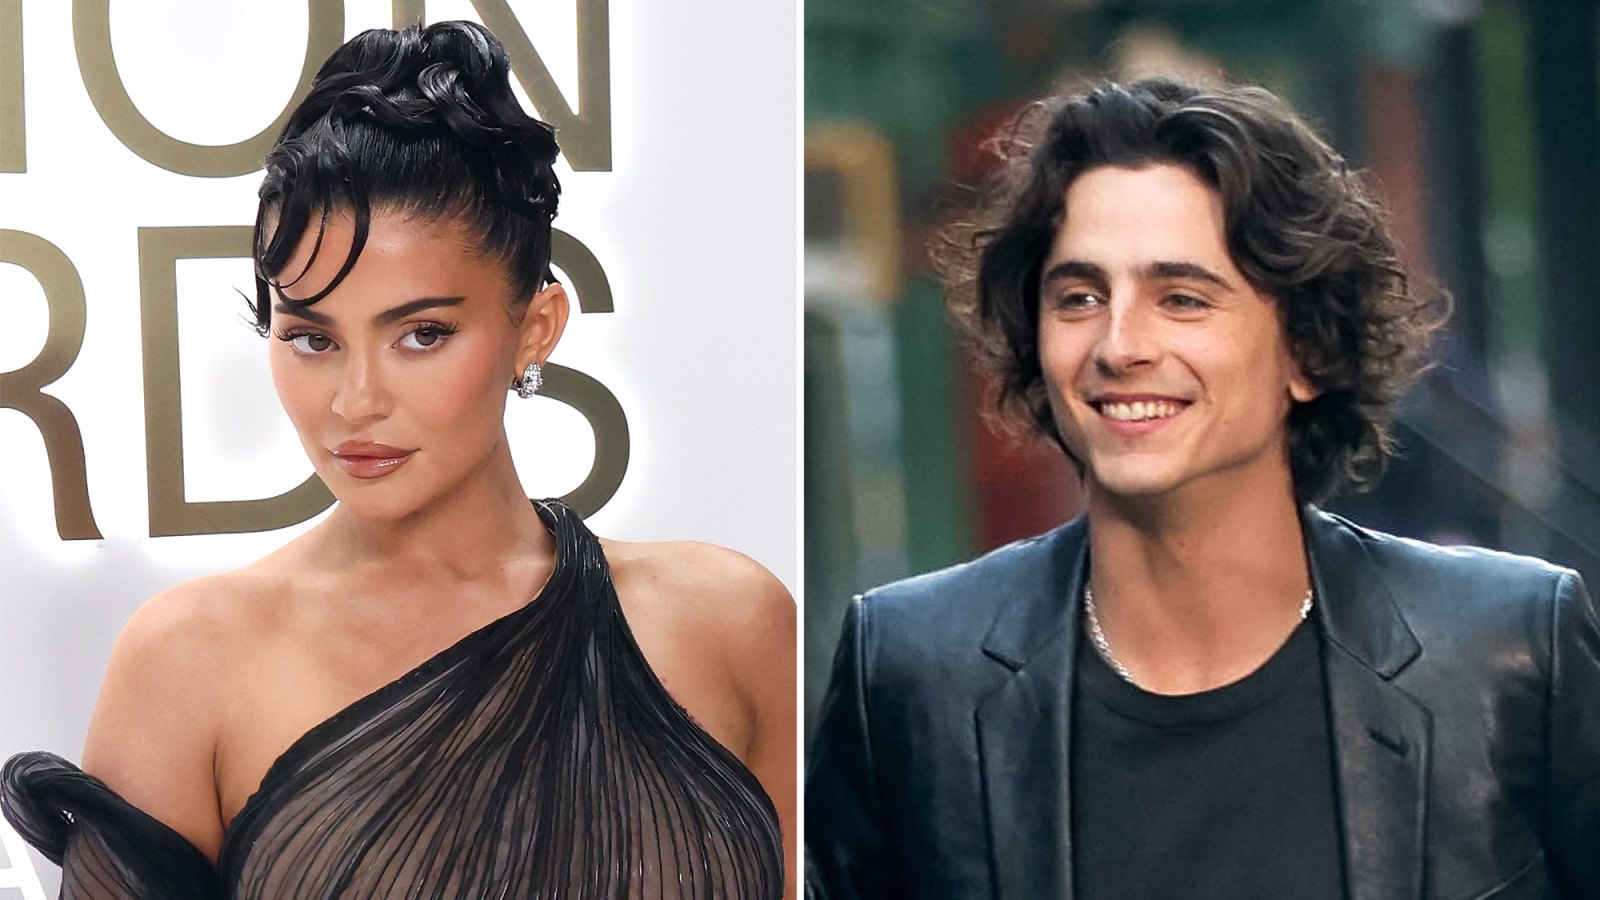 Kylie Jenner and Timothee Chalamet Cuddle Up in Her Phone Lock Screen